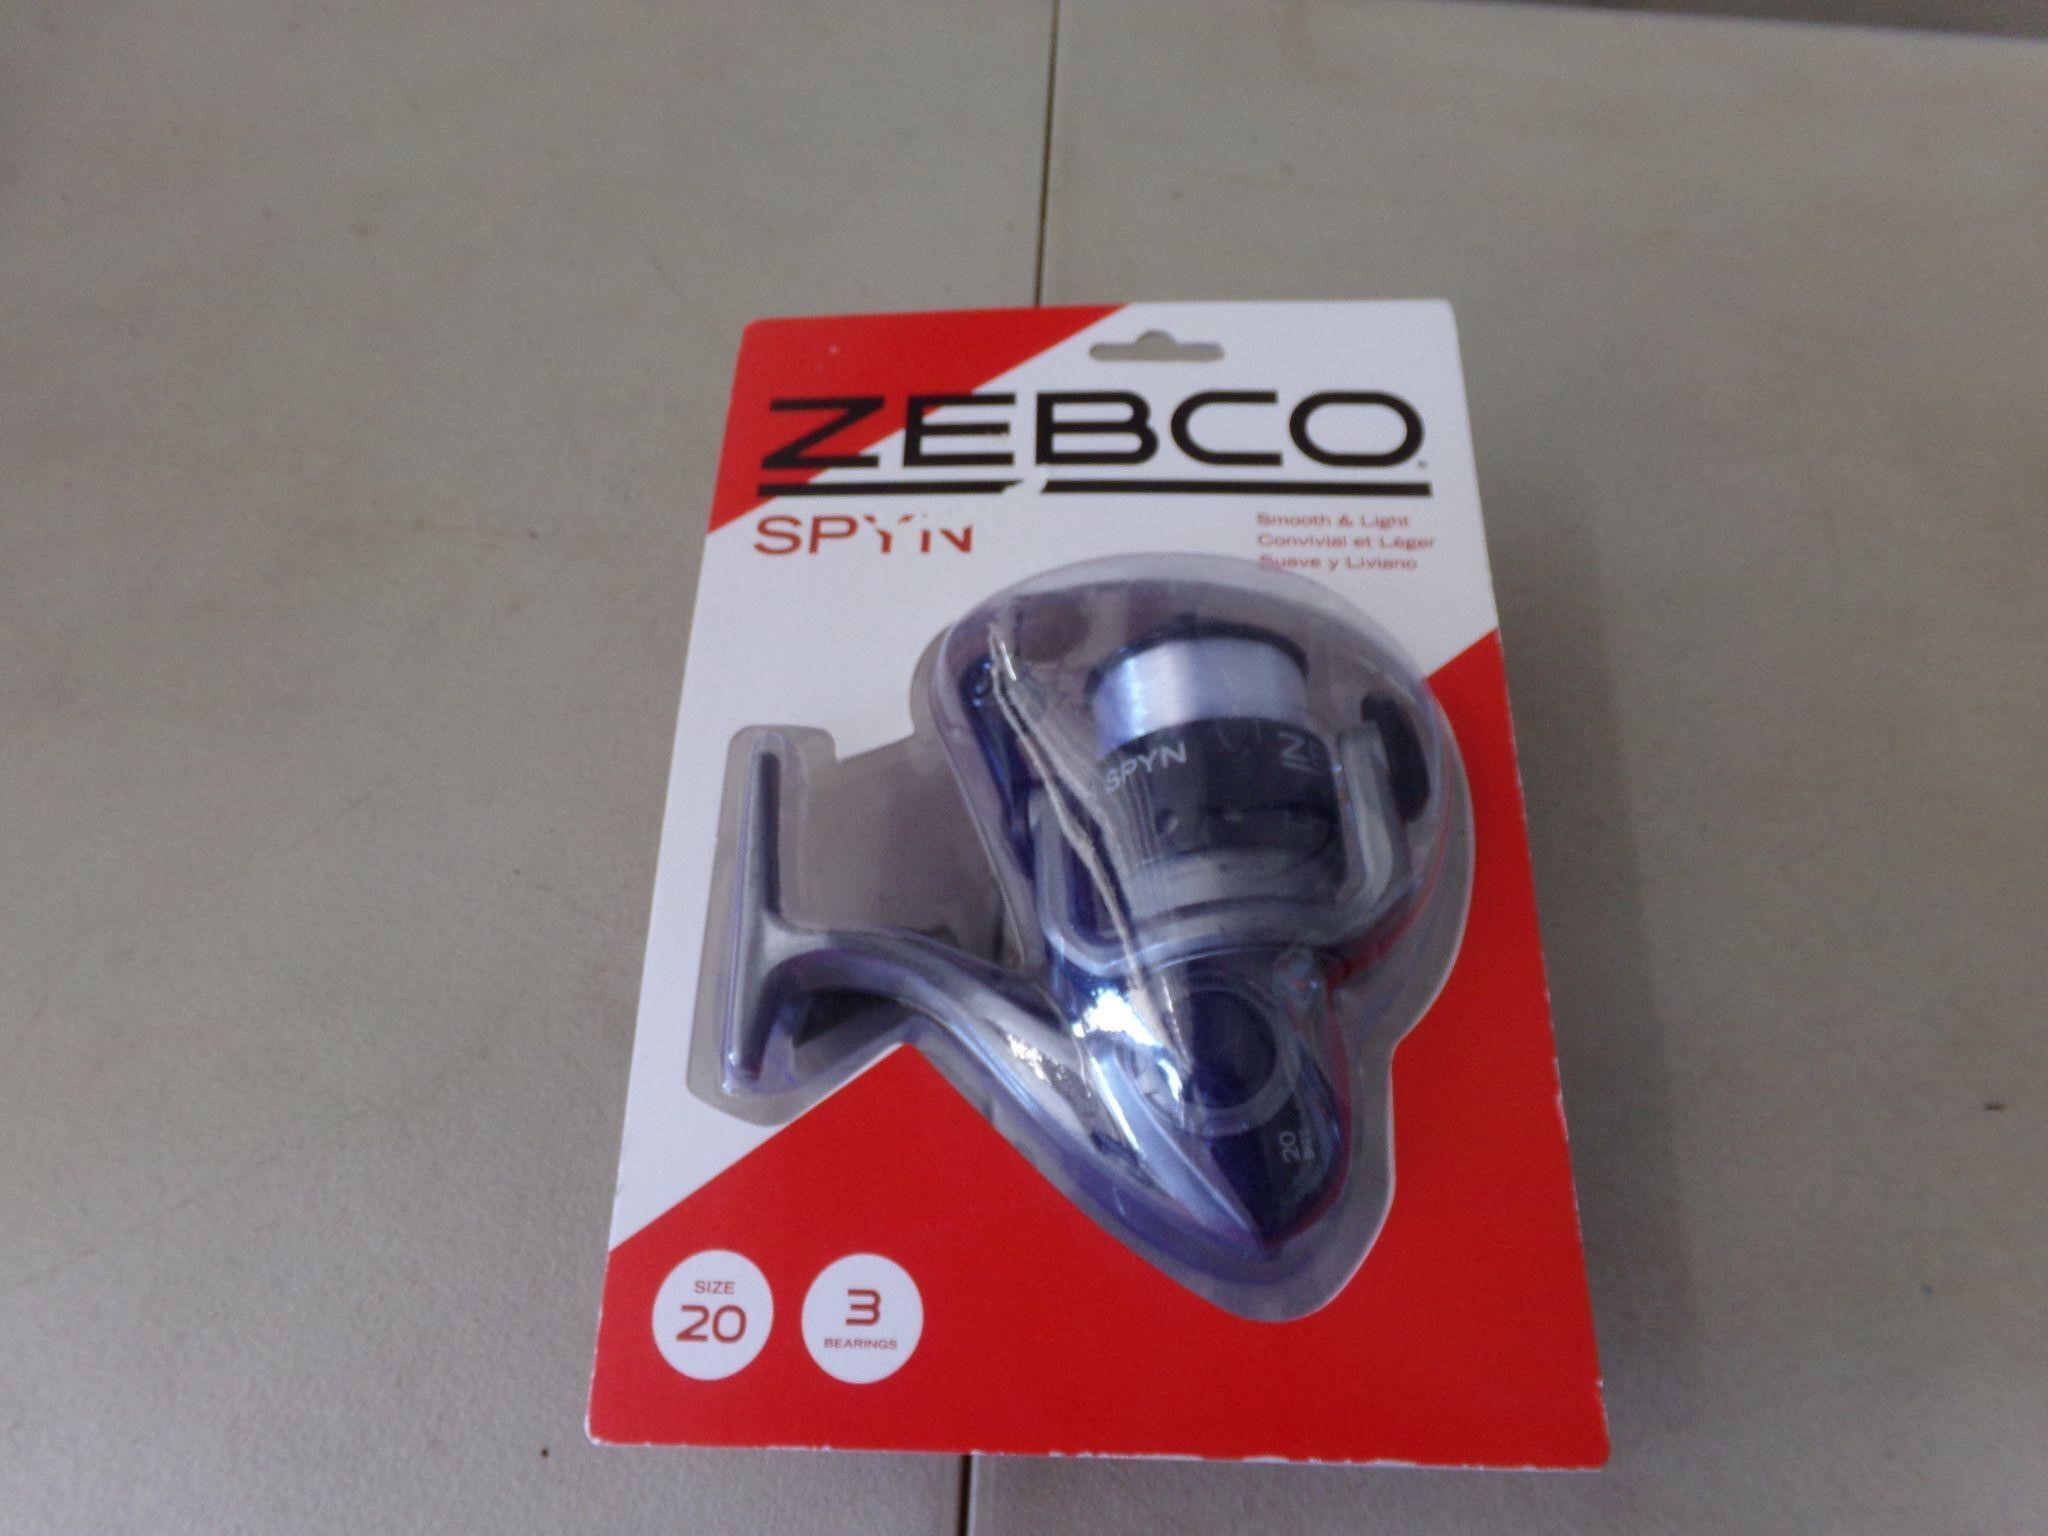 New Zebco open face real